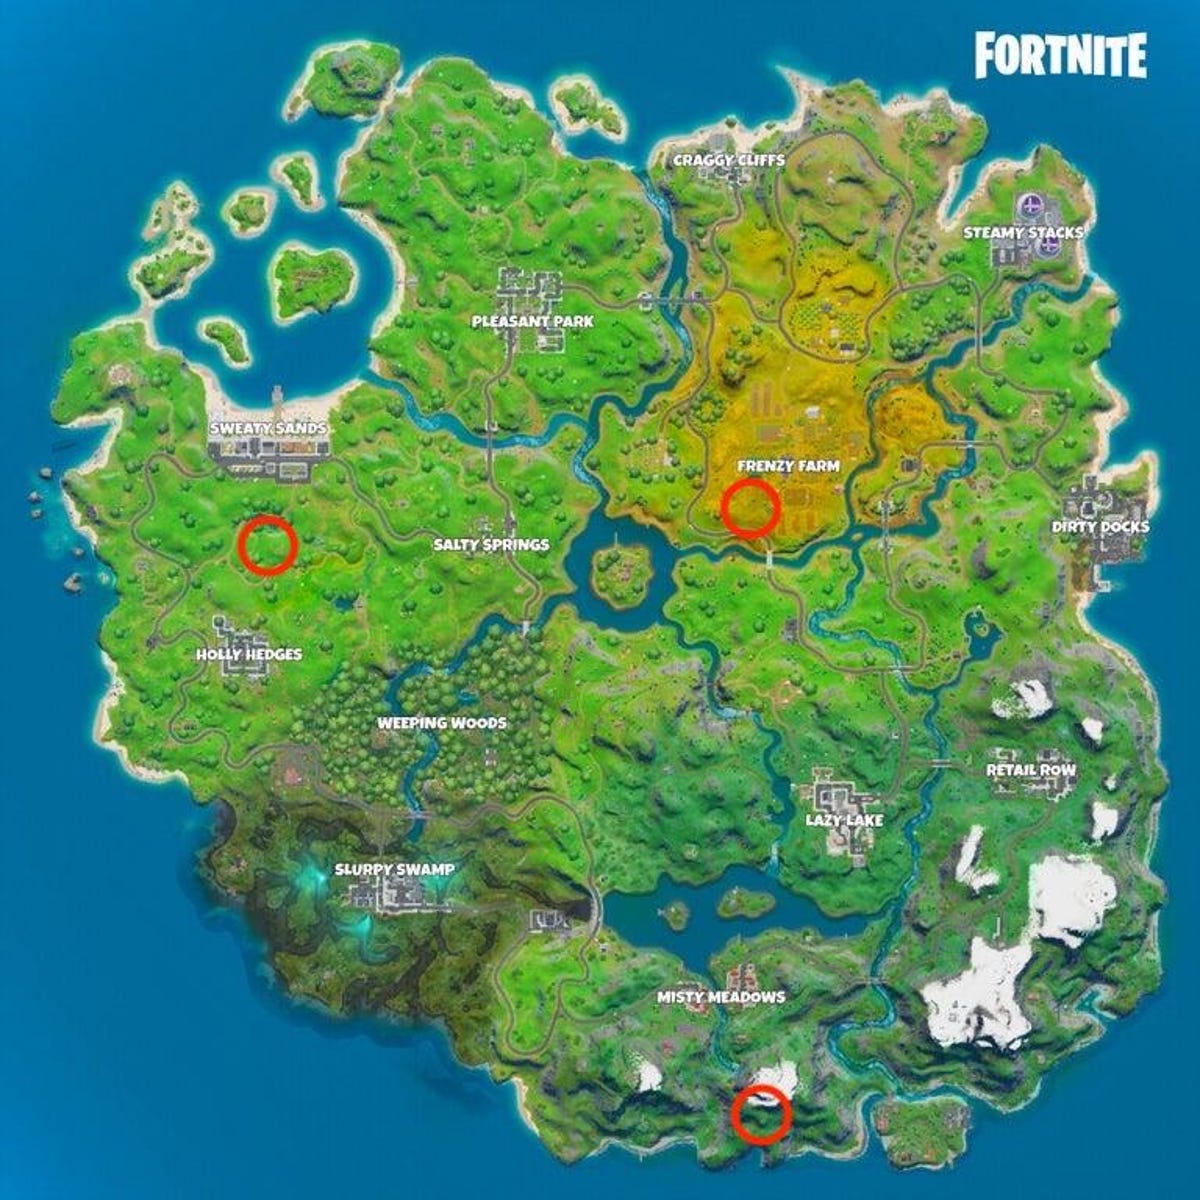 Fortnite Timber Tent map